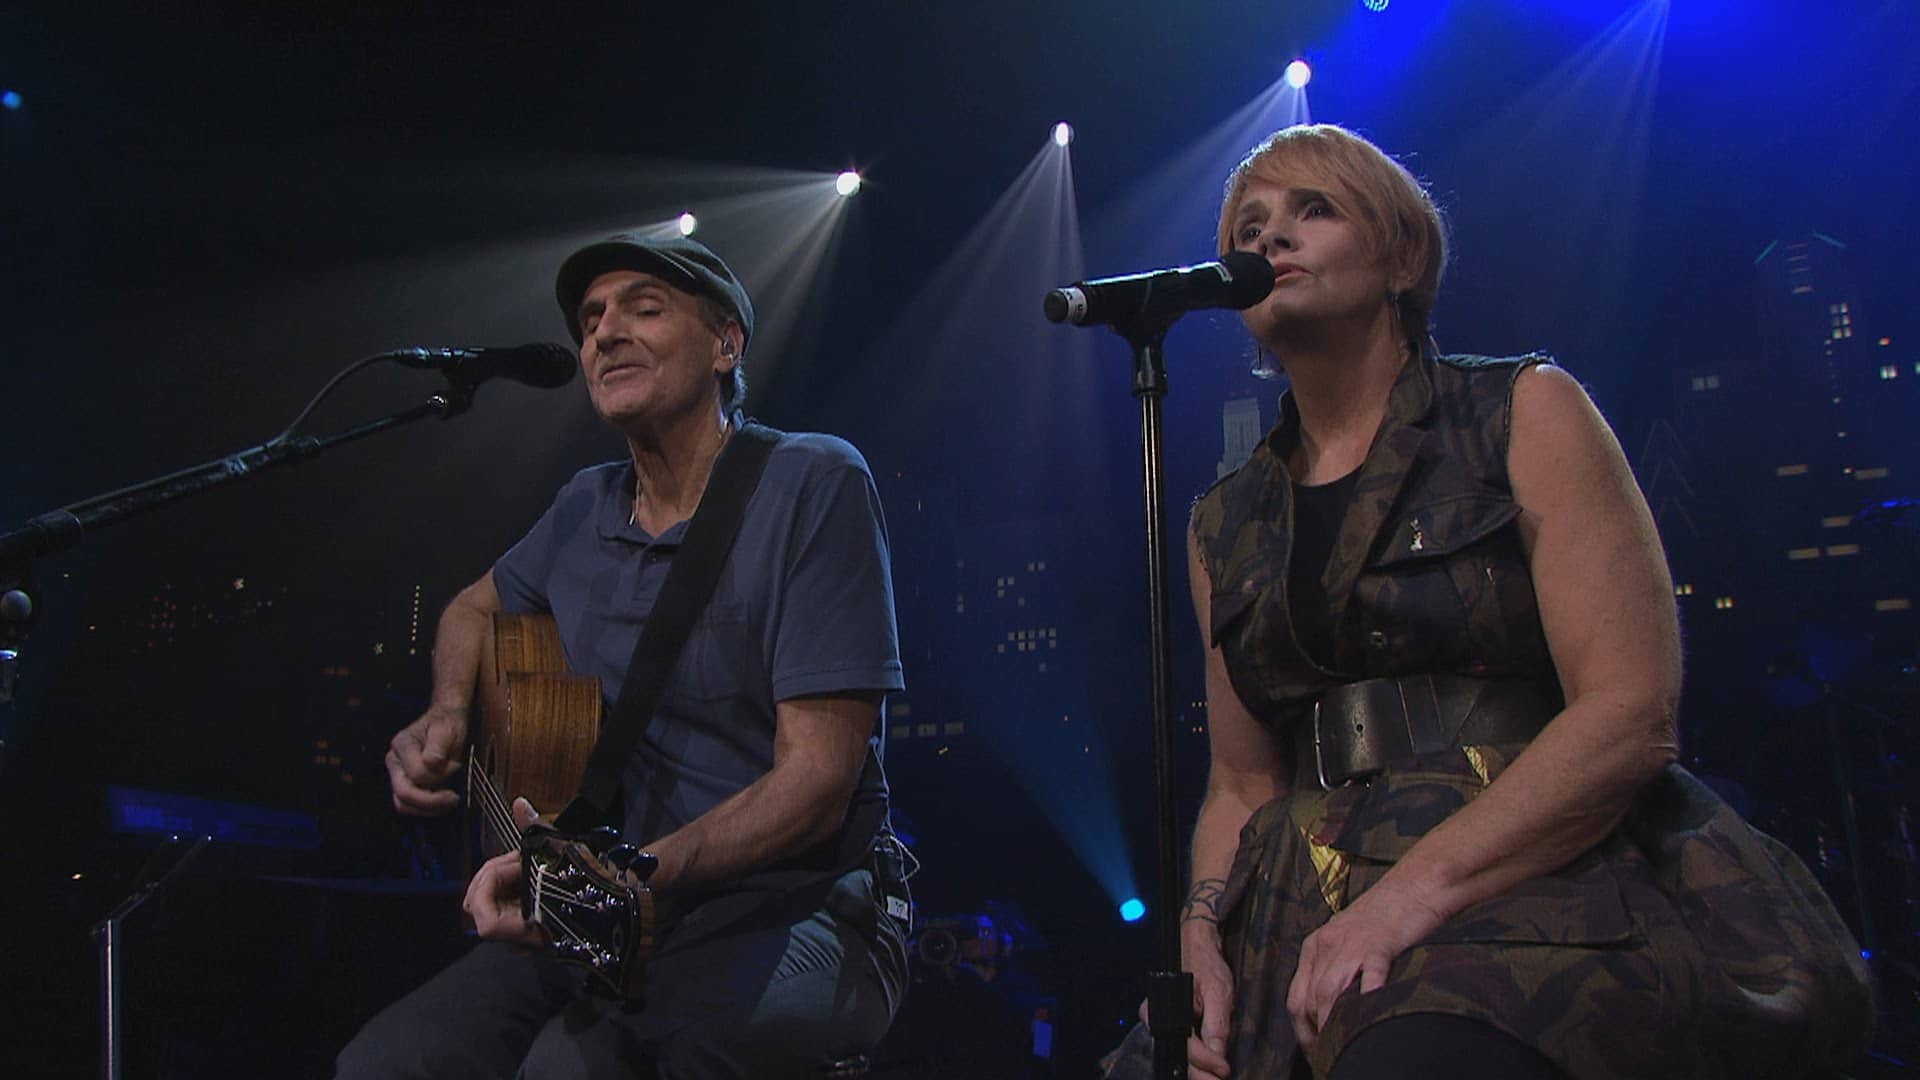 Premiere: James Taylor and Shawn Colvin Duet on Austin City Limits